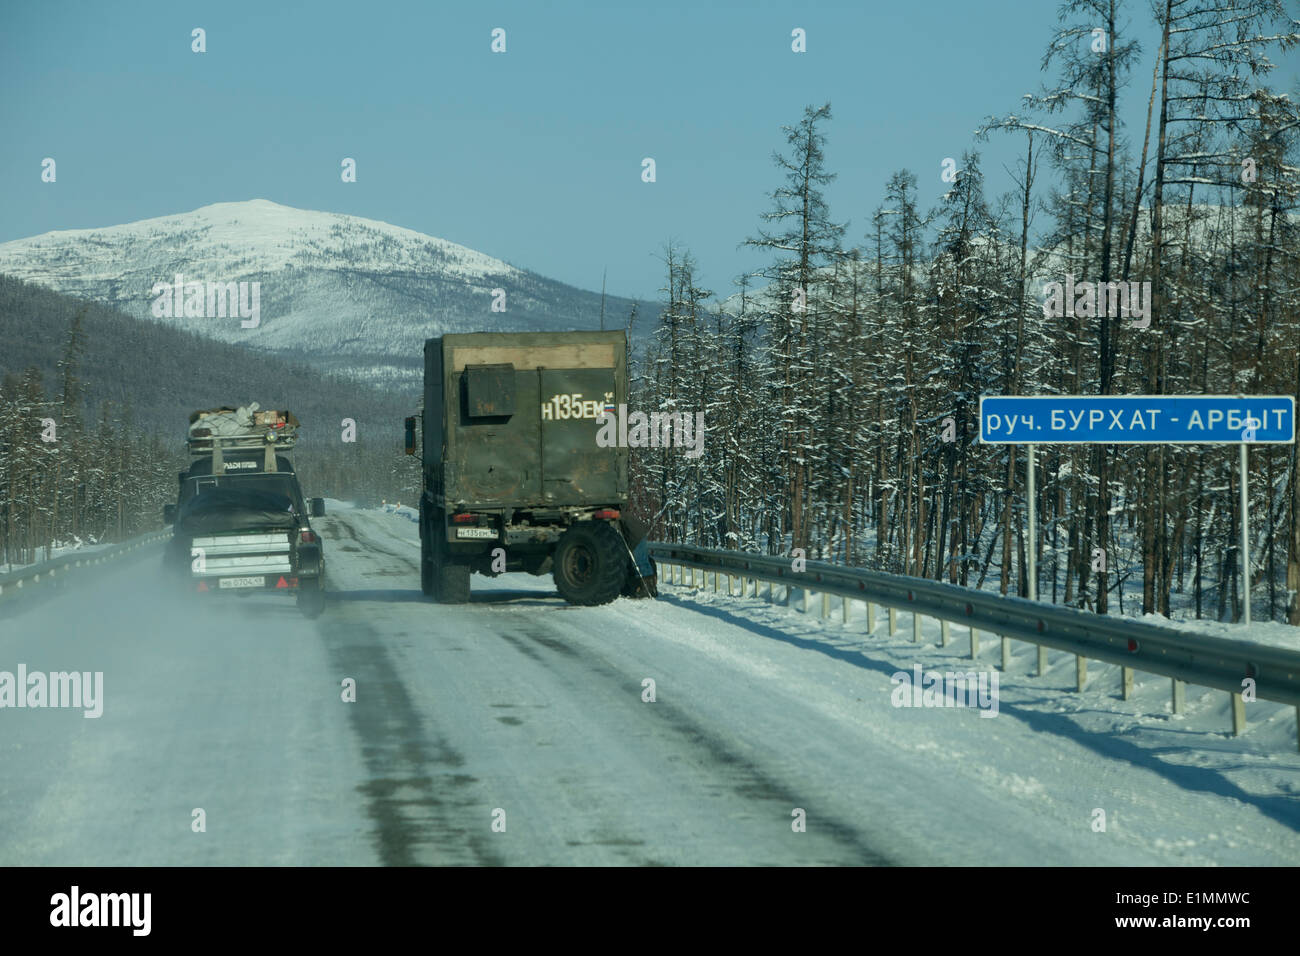 snowy mountains straight road truck Siberia 4wd Stock Photo